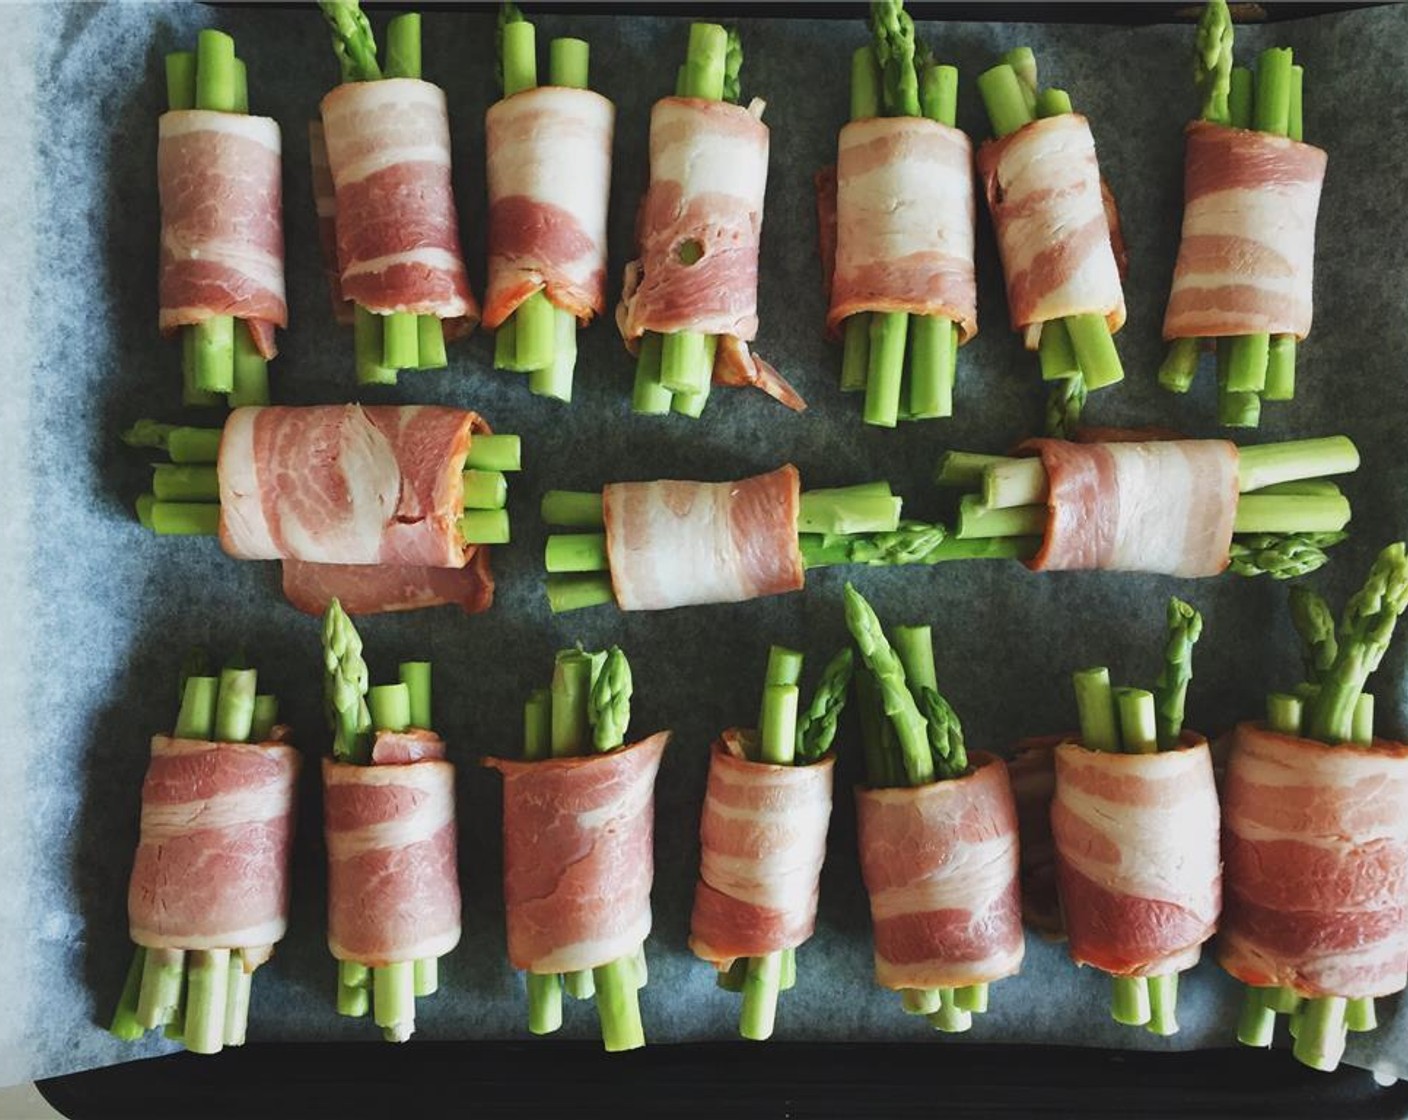 step 8 Roll up all the bacon slices with asparagus or cheese if you like. Line them up on a baking tray with parchment paper. Sprinkle with Salt (to taste) and Ground Black Pepper (to taste). Drizzle with Olive Oil (as needed).